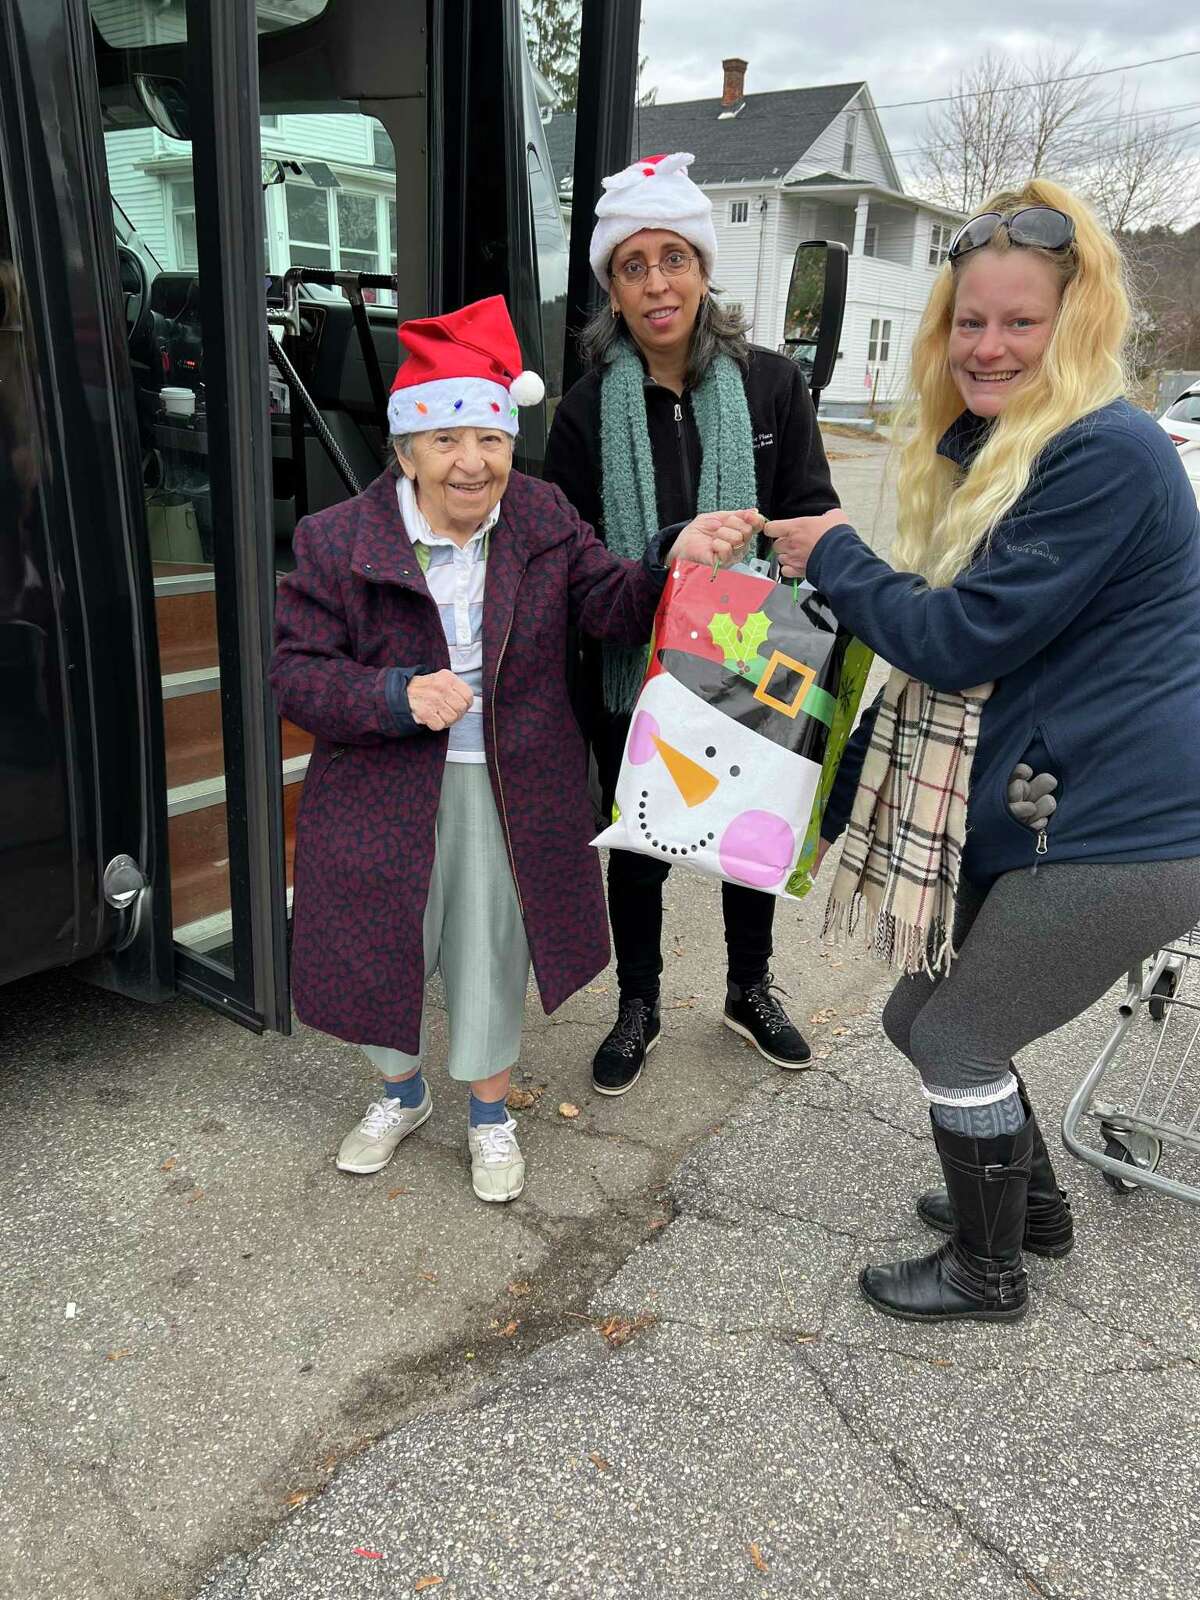 Keystone Place at Newbury Brook in Torrington, a retirement community, hosted two families from Friendly Hands Food Bank, filling their Christmas wish lists. The residents of Keystone place also donated gift certificates and coats to the food bank. On Dec. 8, Keystone delivered the gifts to the food bank in their van. Pictured from left are Keystone resident Lucy Fenn, employee Nelvis Santiago, and food bank staff member Tasha Danboise.